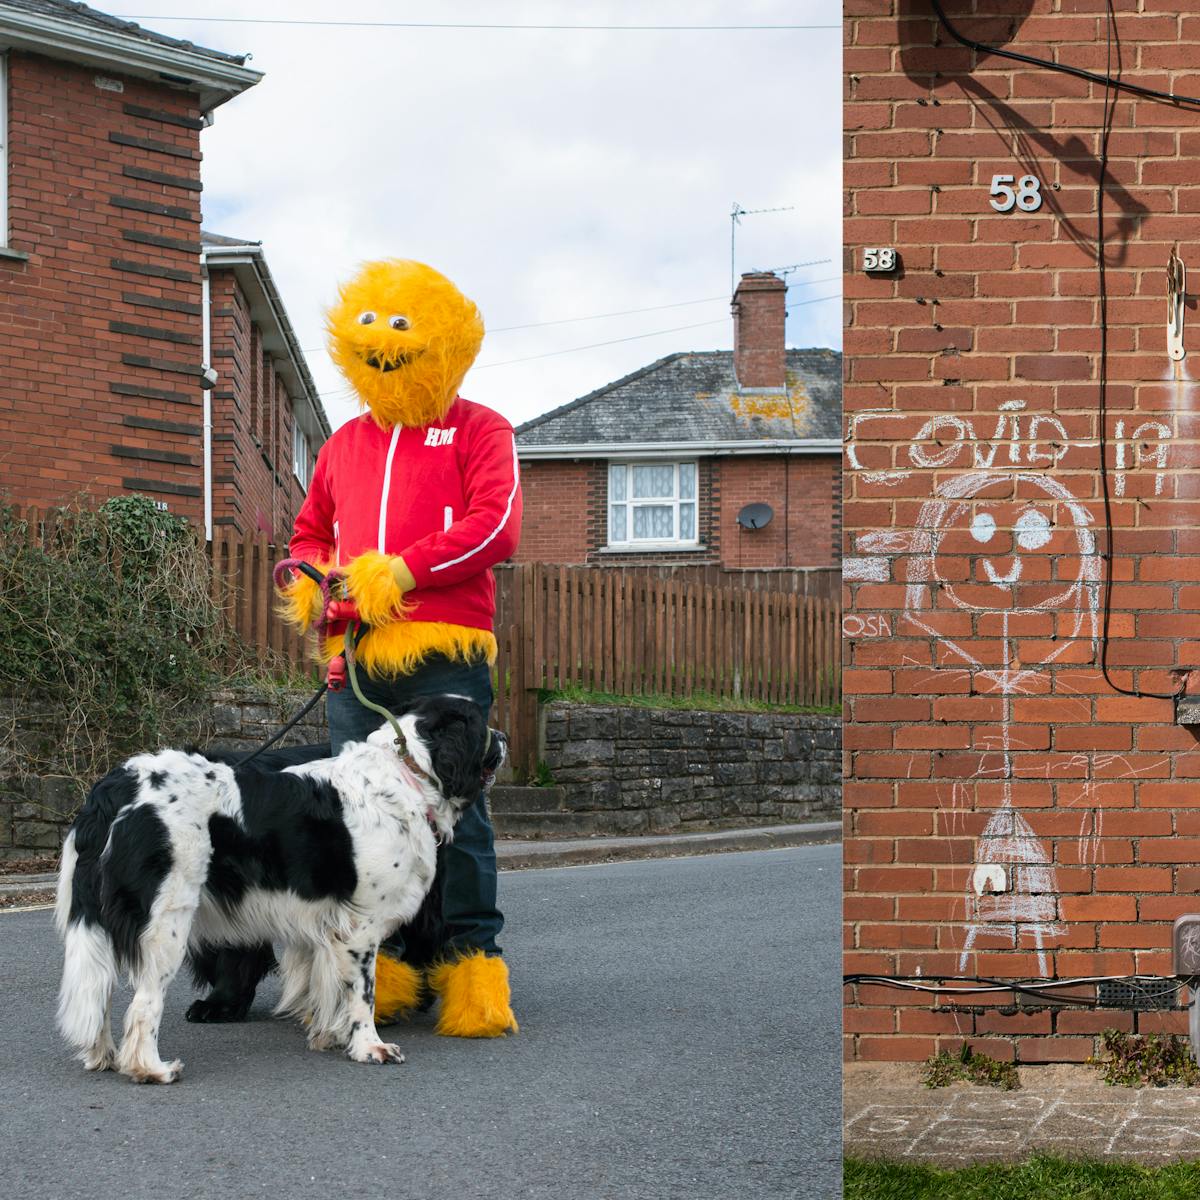 A photographic diptych. The image on the left shows an adult wearing a furry yellow Honey Monster costume, including a red tracksuit top and blue tracksuit bottoms standing in a residential road with red brick houses beyond. The Honey Monster is holding a large black and white dog facing away from camera. The image on the right shows a section of the ground floor of a red brick house with a white PVC door and window with net curtains. On the brick wall surrounding the window there is a large chalk drawing of a stick person with Covid-19 written above it. Beneath the window is written ‘stay home’. 